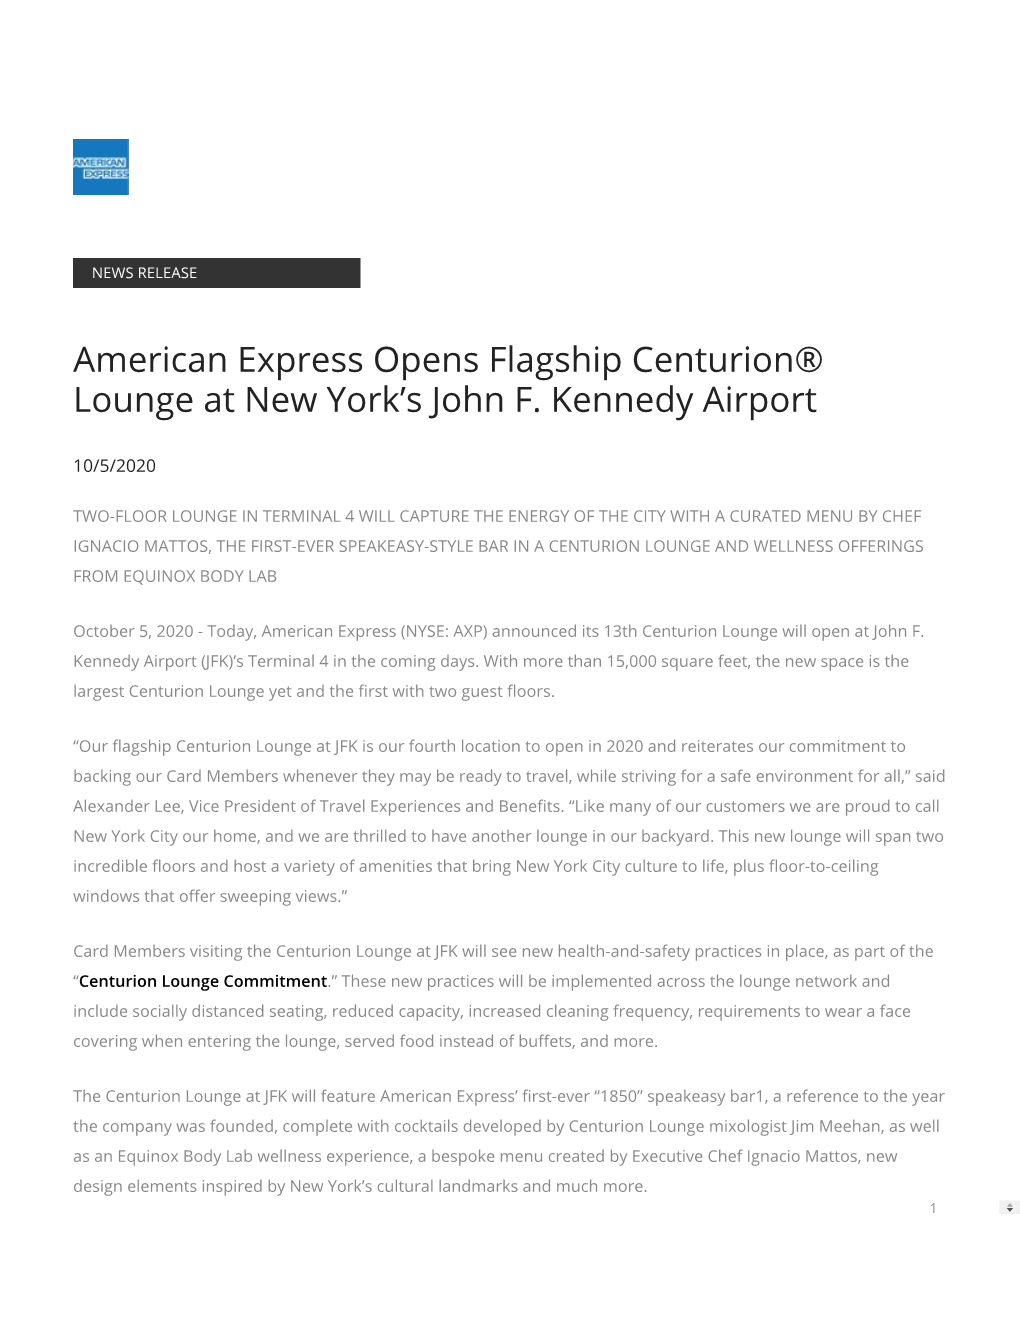 American Express Opens Flagship Centurion® Lounge at New York's